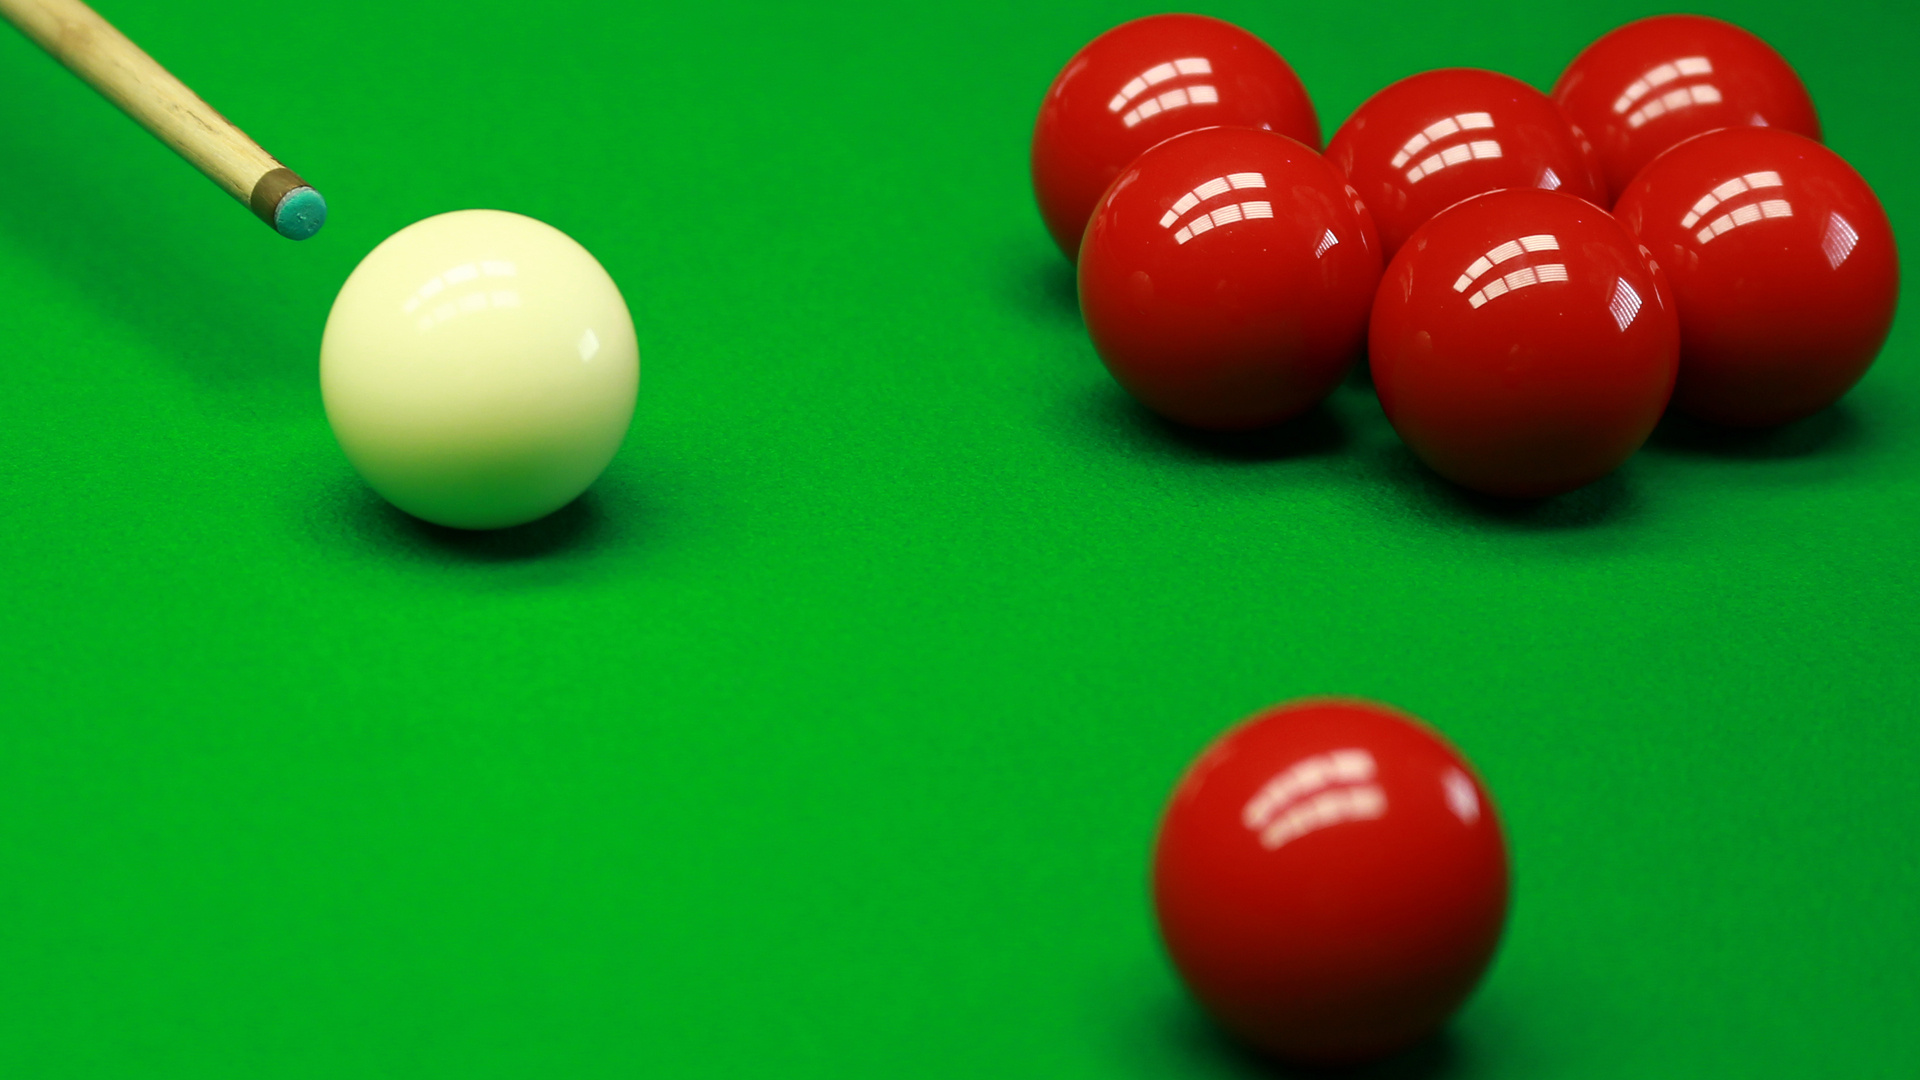 Snooker: A classic cue game that is played with twenty-two balls - a cue ball, fifteen red balls, and six other balls. 1920x1080 Full HD Background.